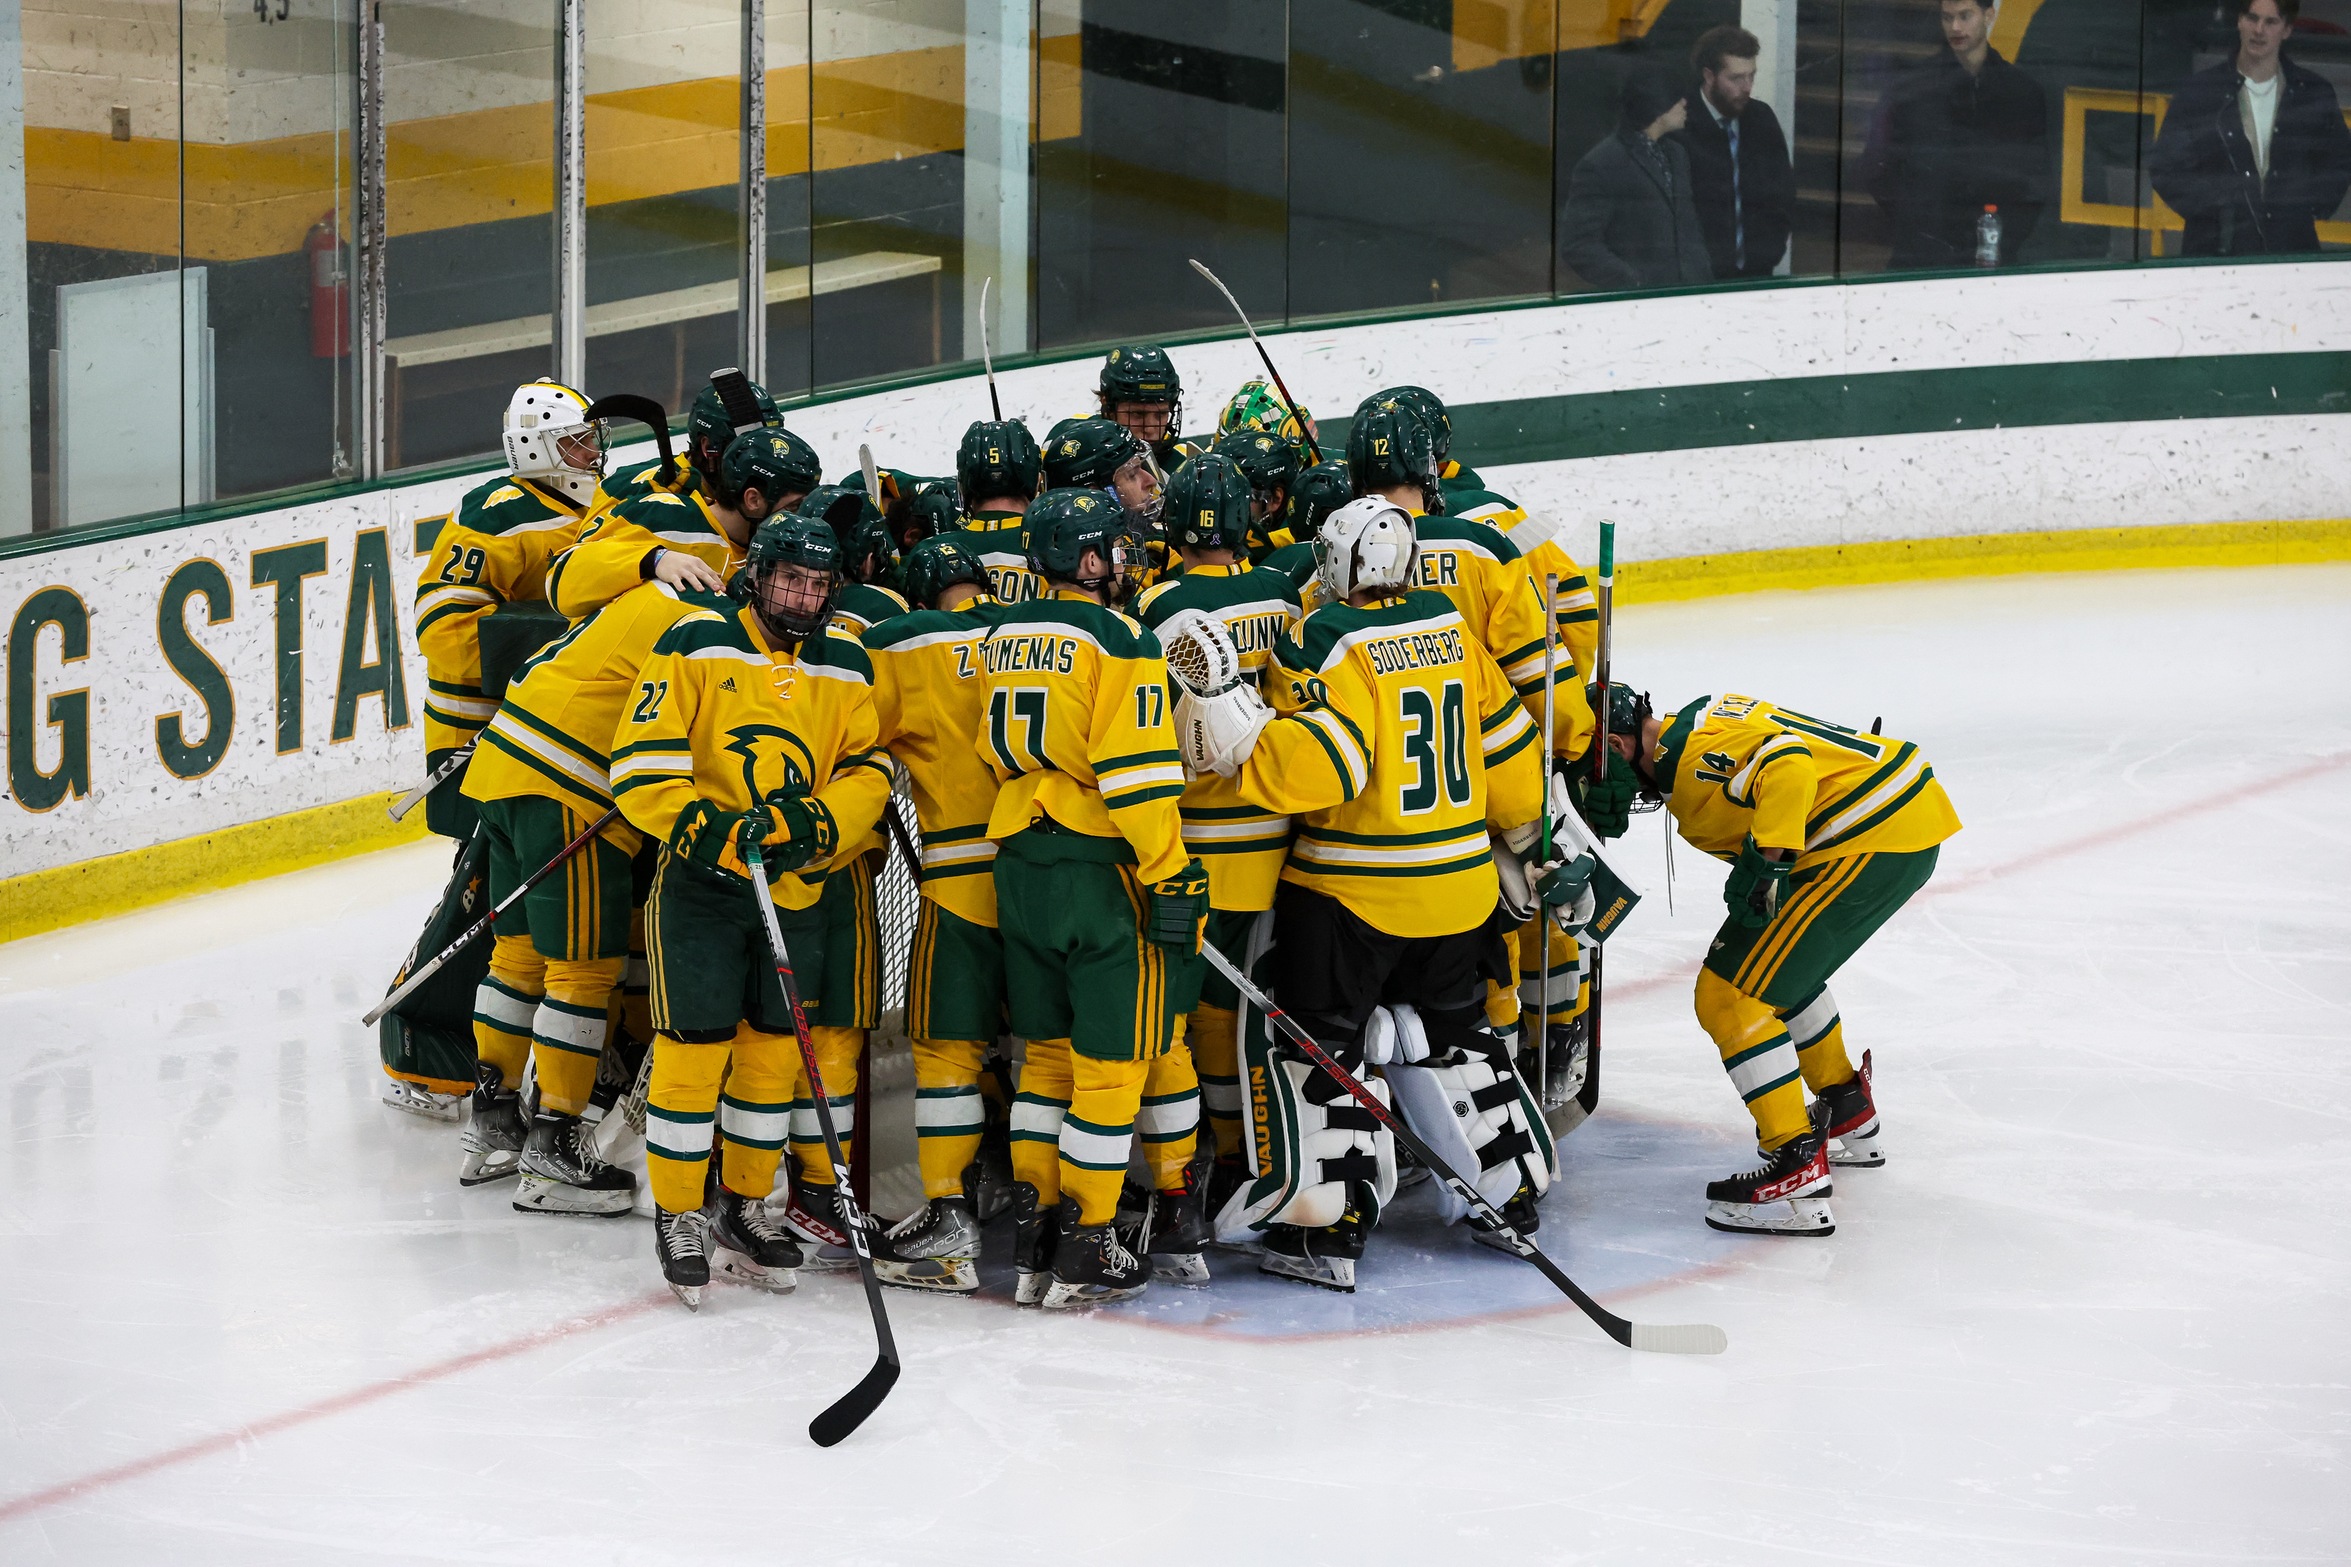 Ice Hockey Falls to Plymouth in MASCAC Championship